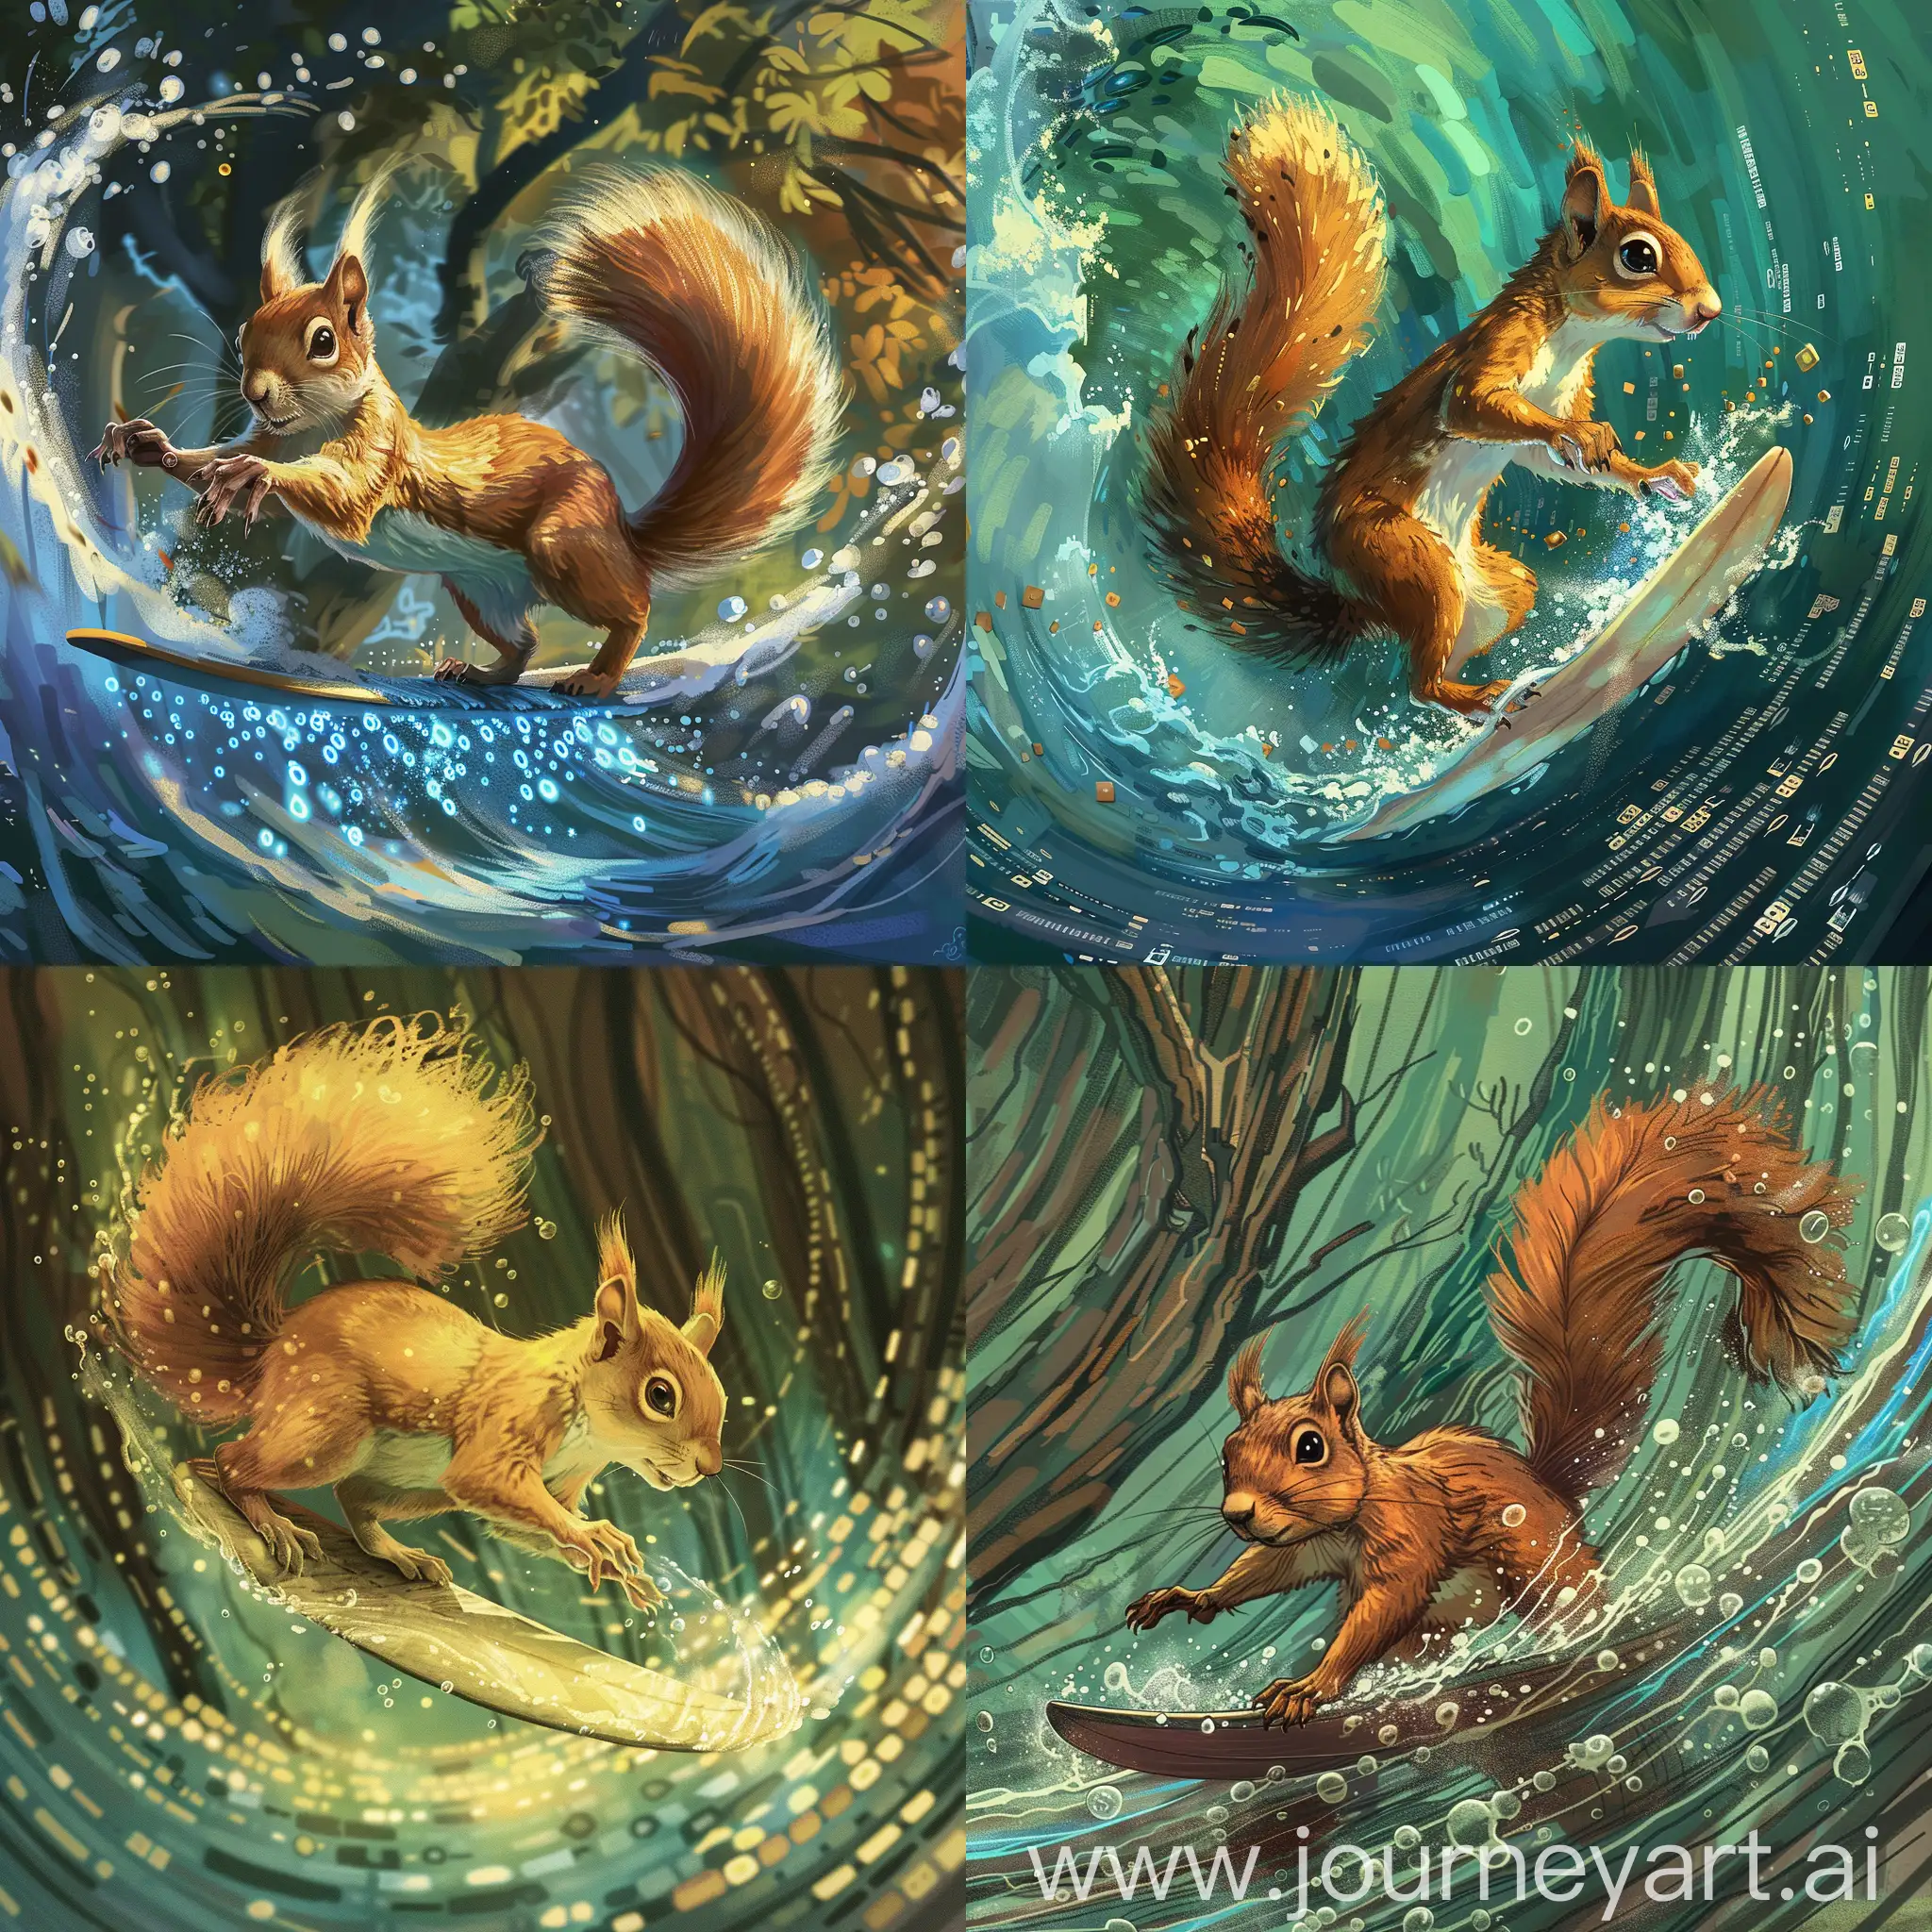 Can you draw a picture of a squirrel surfing on a stream of data in a heroic fantasy world?